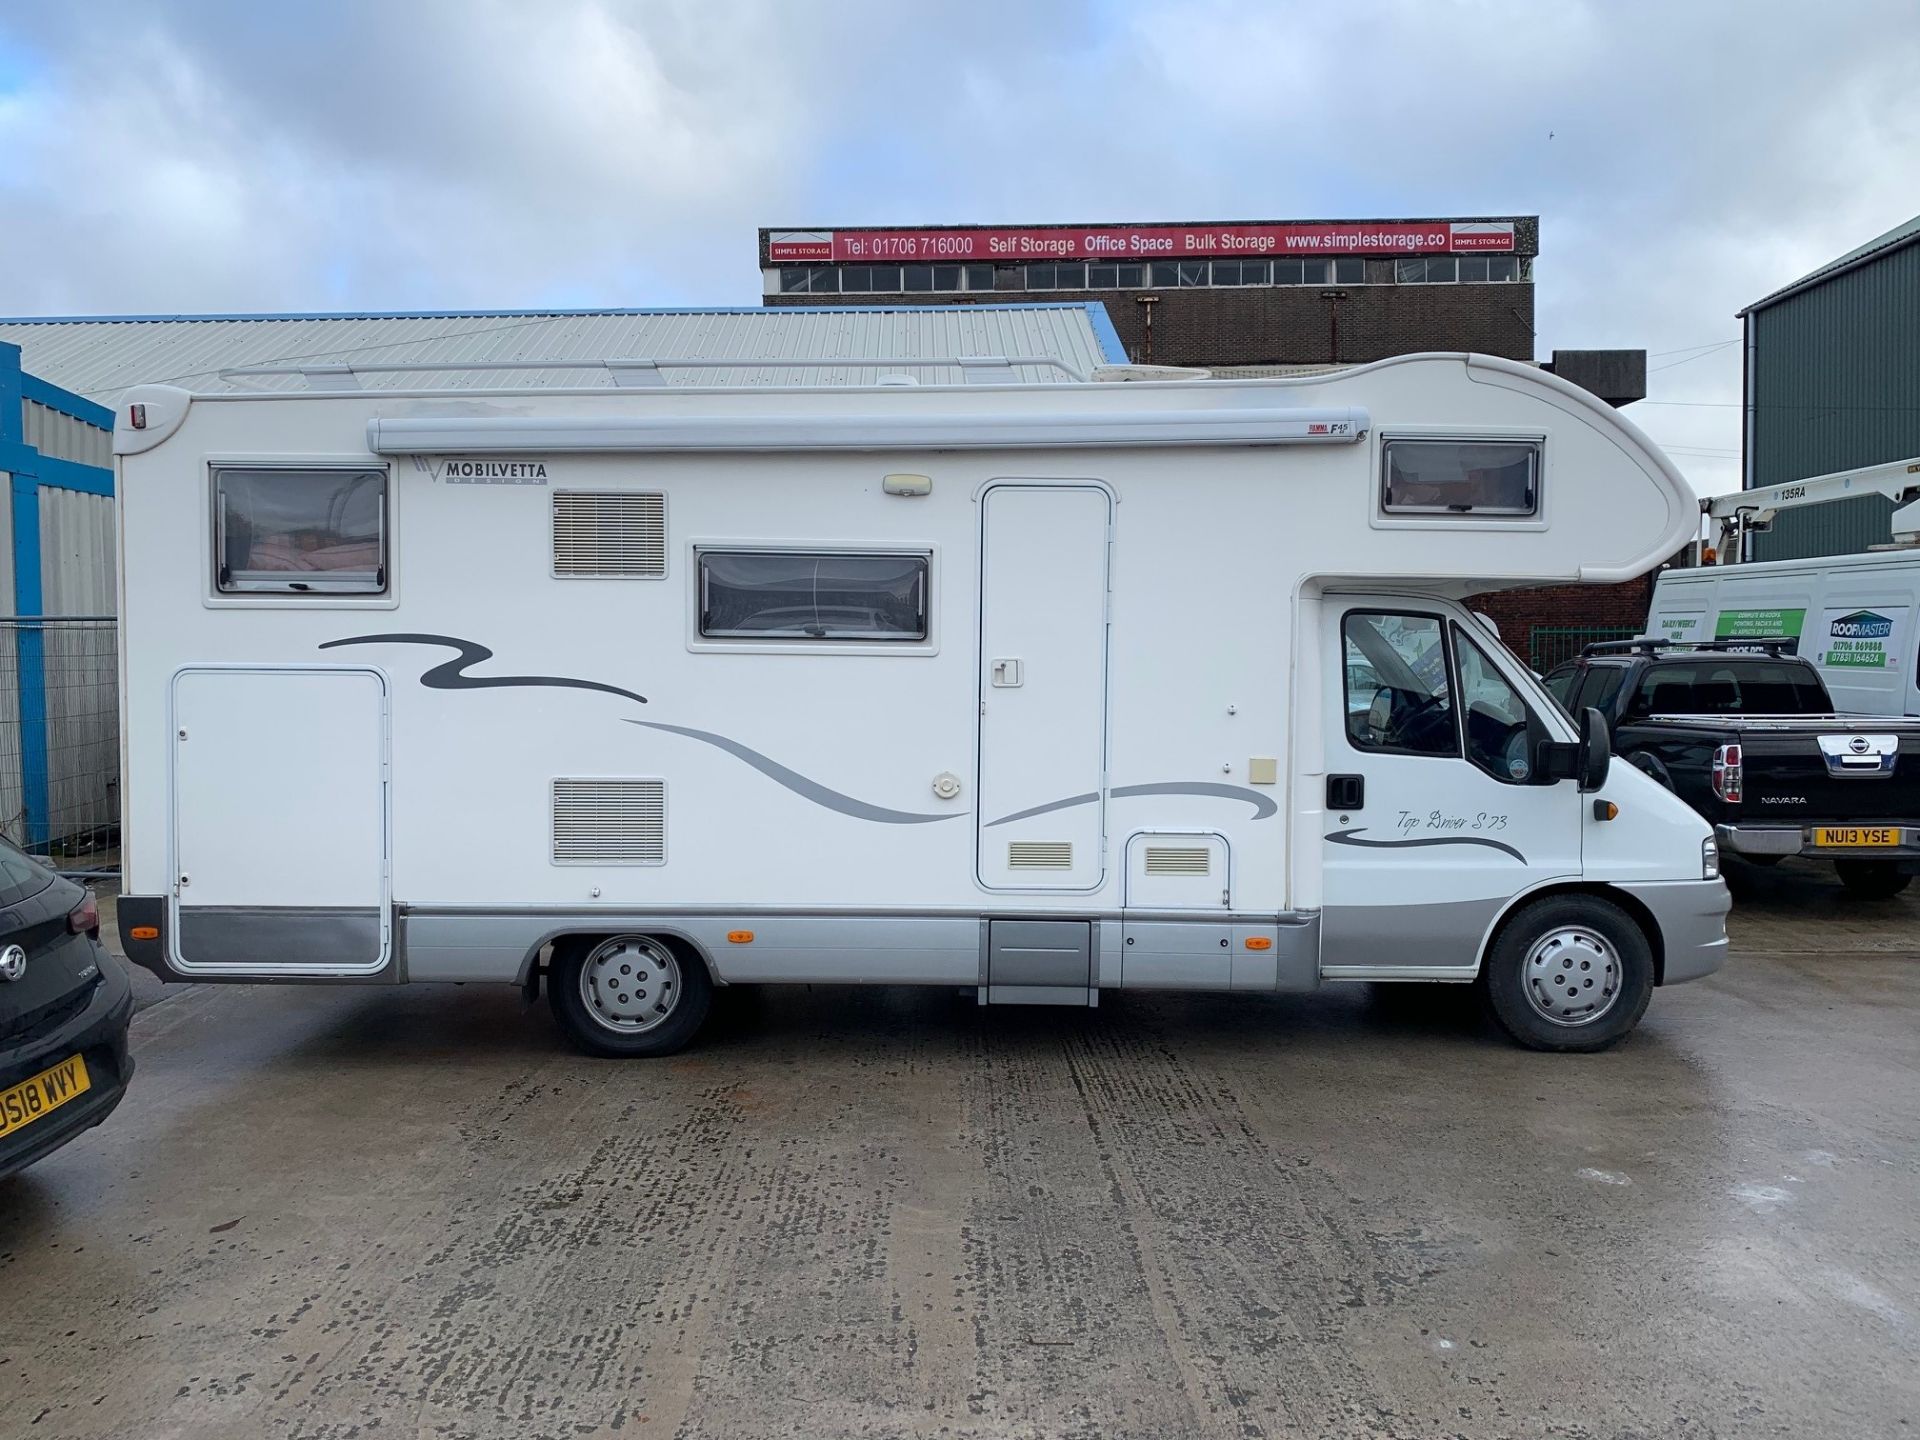 Fiat Mobilvetta Topdriver S73 Motorhome, 2.8L, Diesel, Only 17000 Miles, MOT'd Until May 2020 - Image 5 of 21